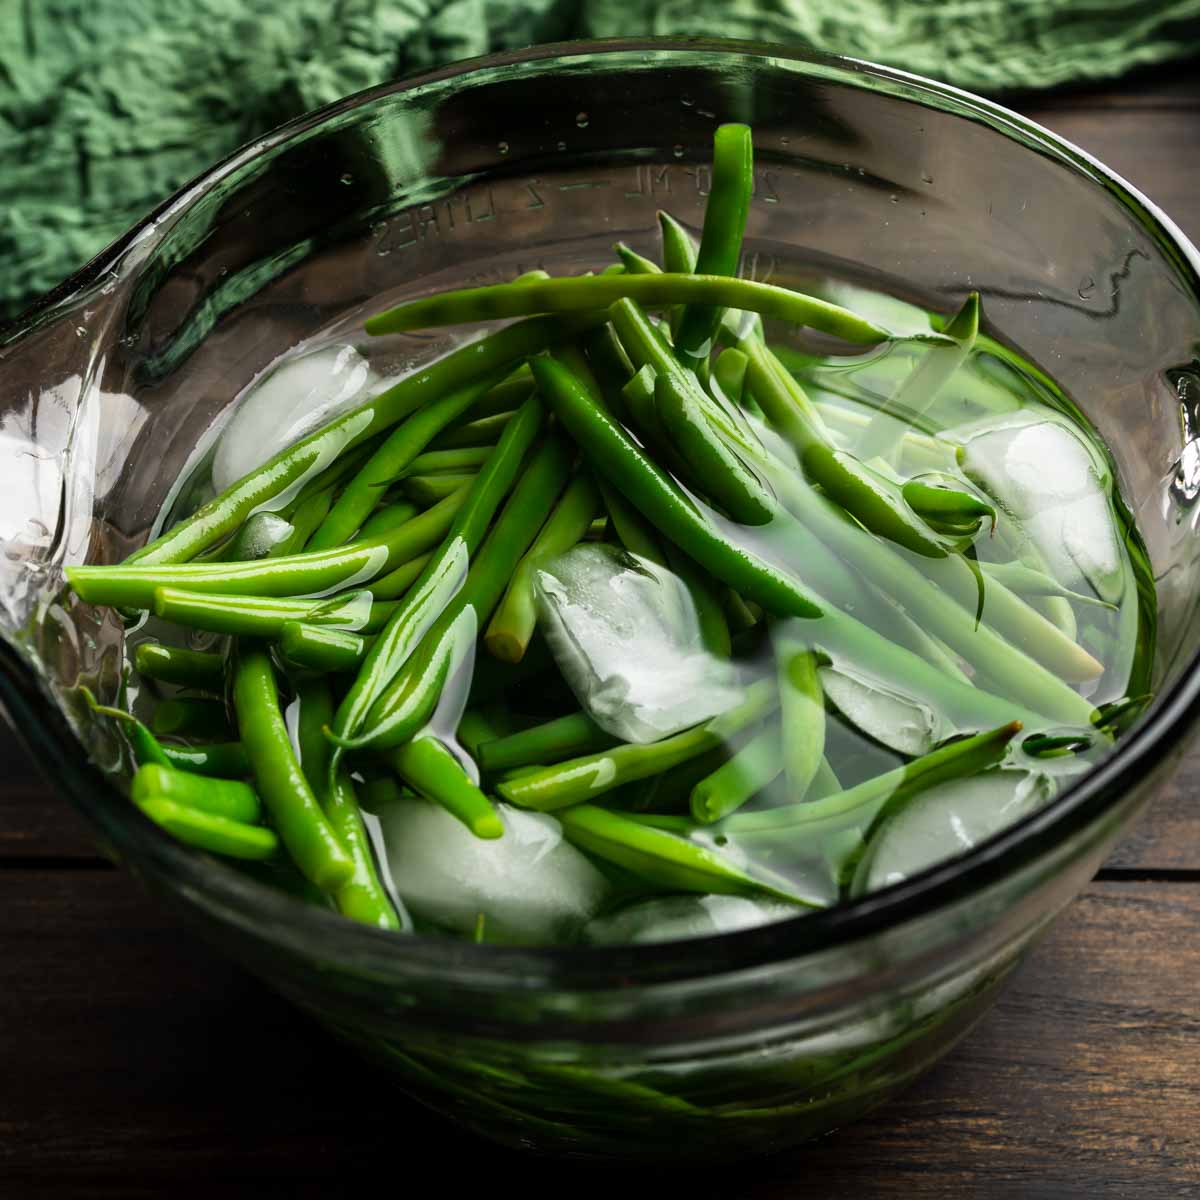 A glass bowl full of steamed green beans in an ice water bath